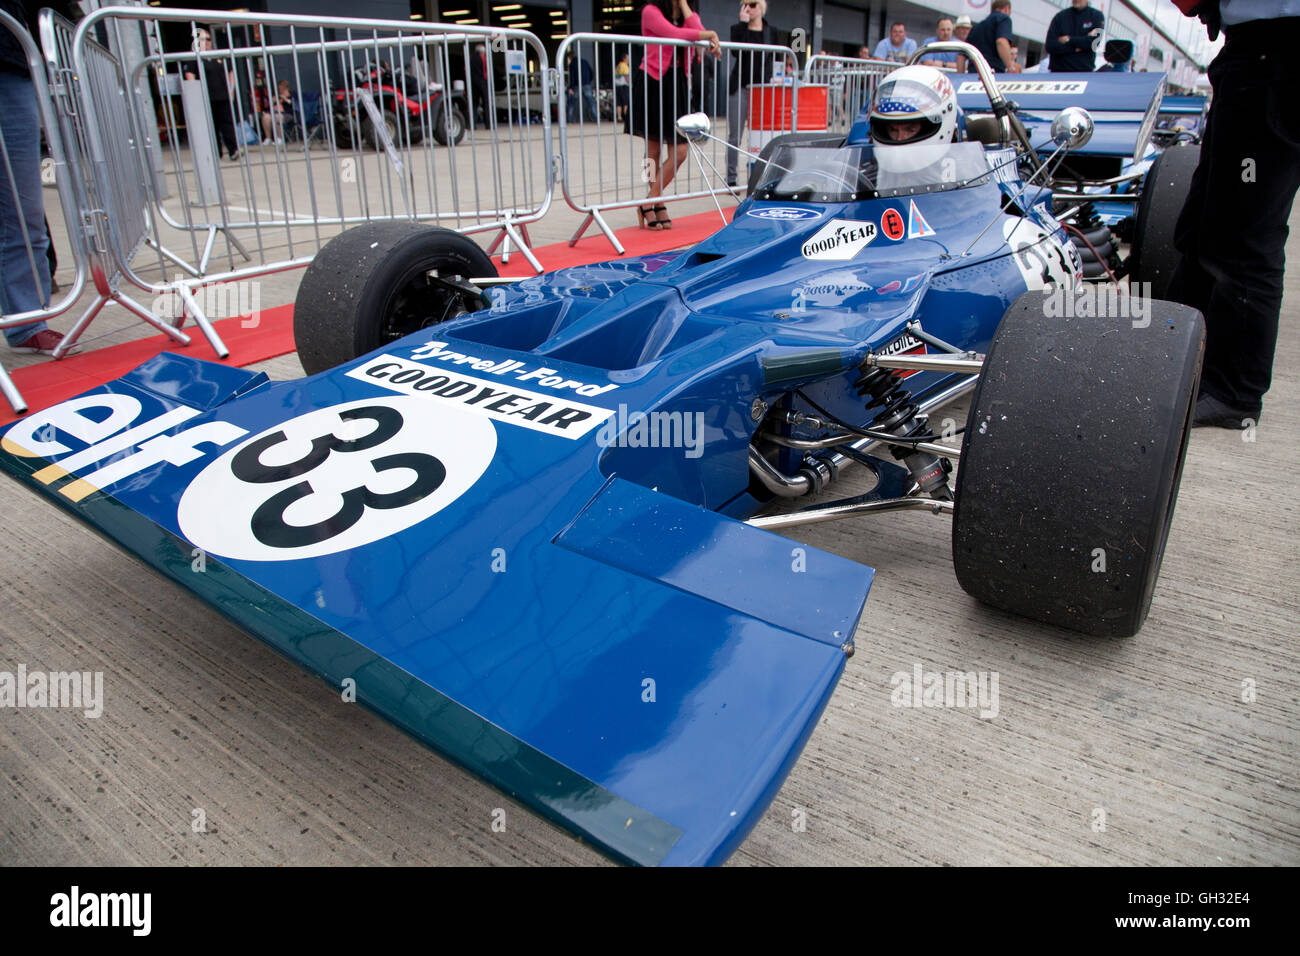 Silverstone Classic 2016 Banque D'Images